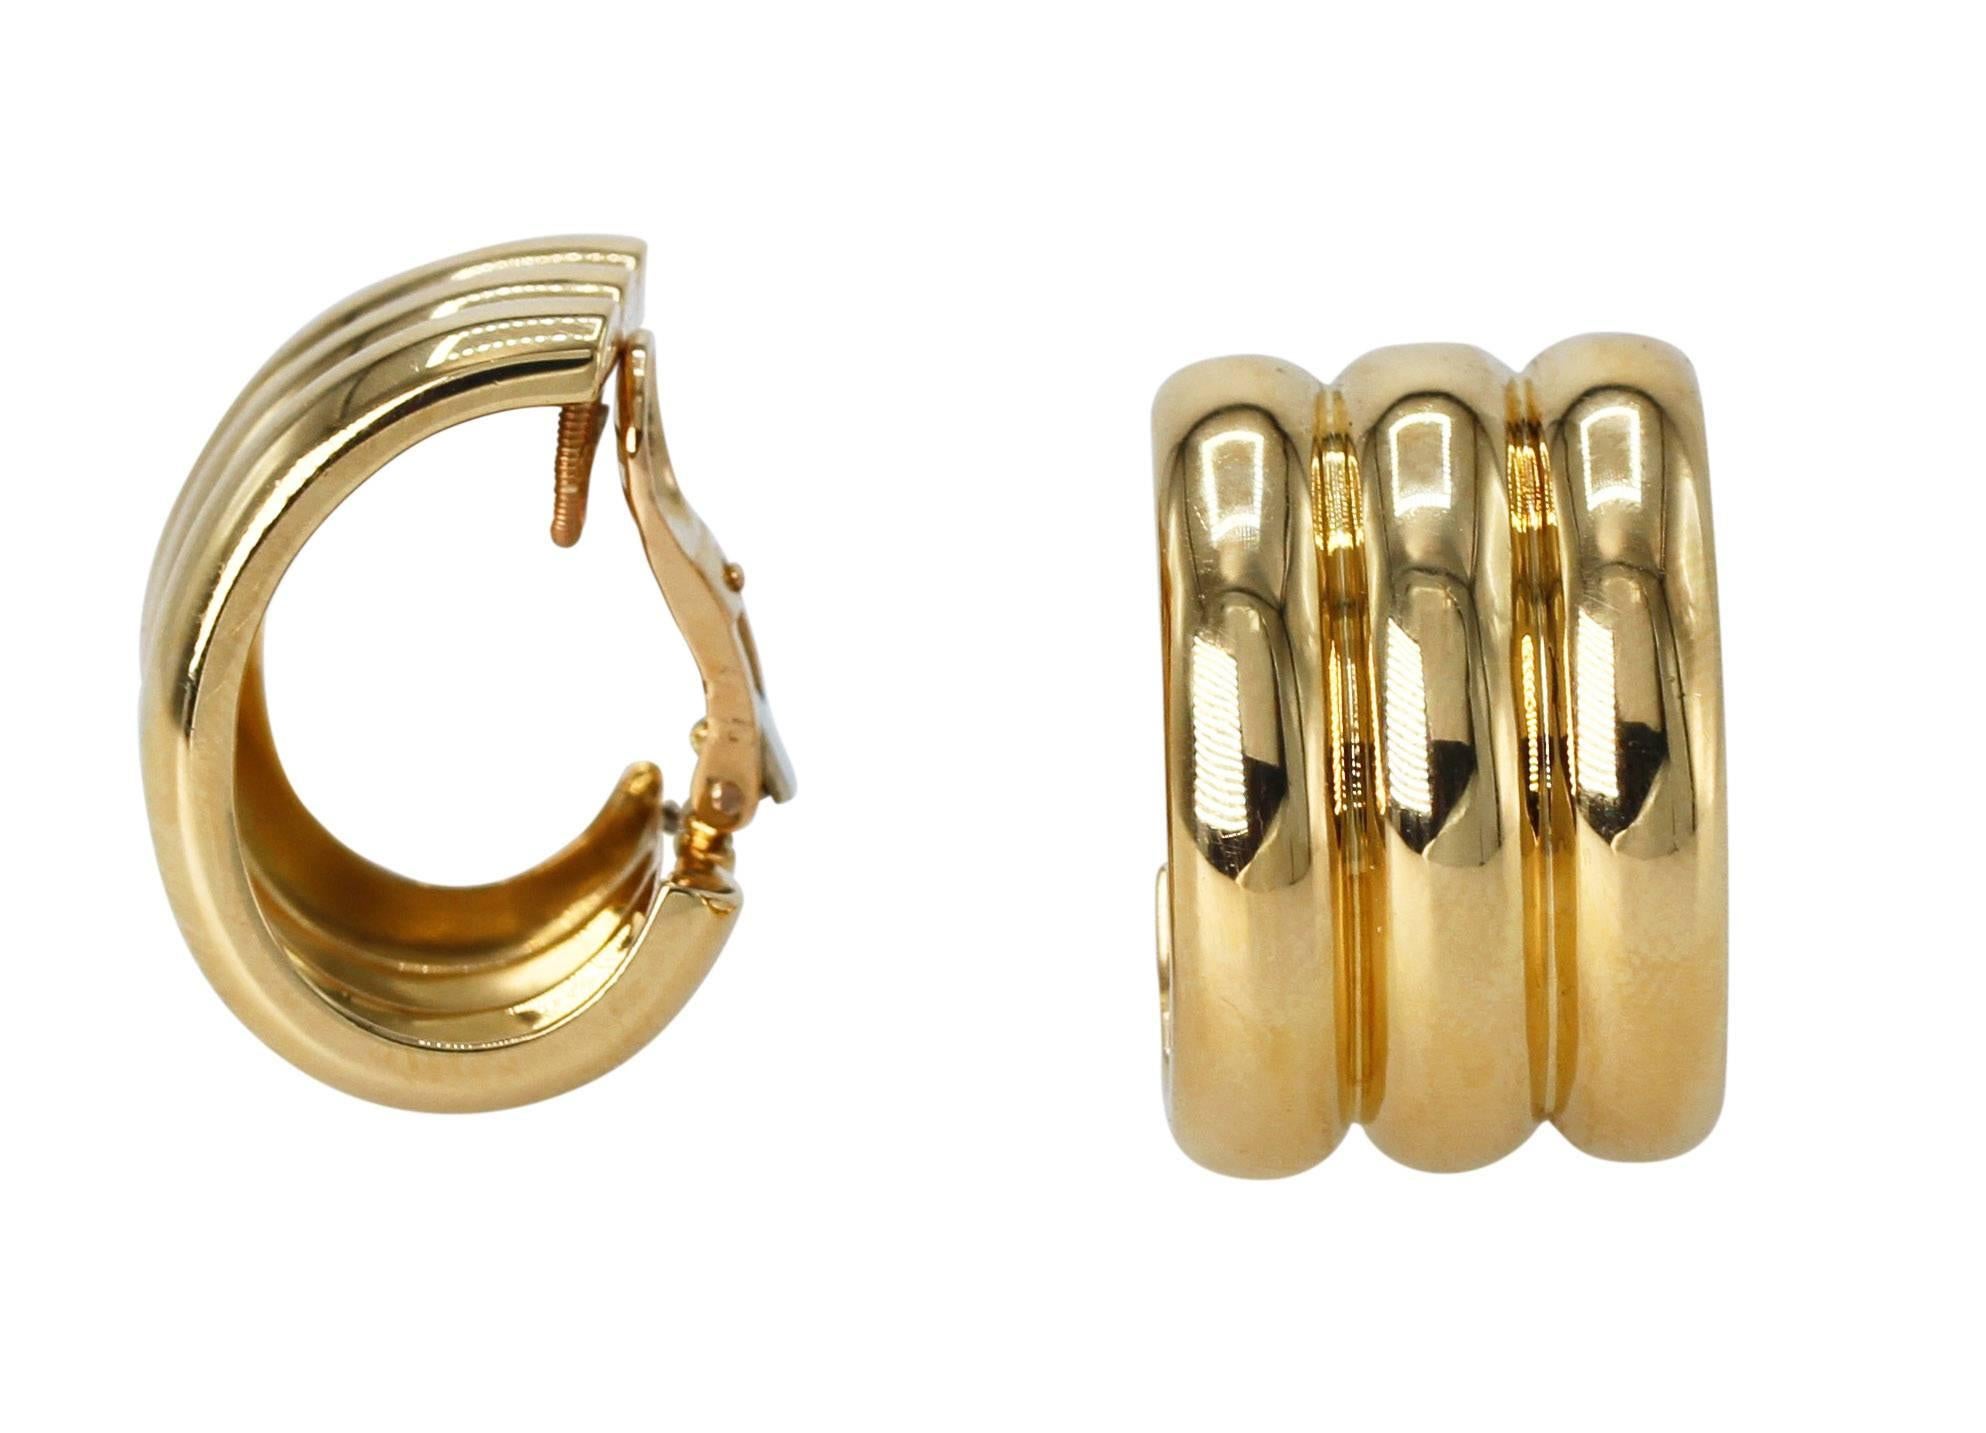 Pair of 18 Karat Yellow Gold Hoop Earclips by Cartier, France
• Signed Cartier, numbered 641248 
• French assay marks and makers marks
• 18 karat yellow gold, gross weight 27.9 grams
• Measuring 1 by 5/8 inch